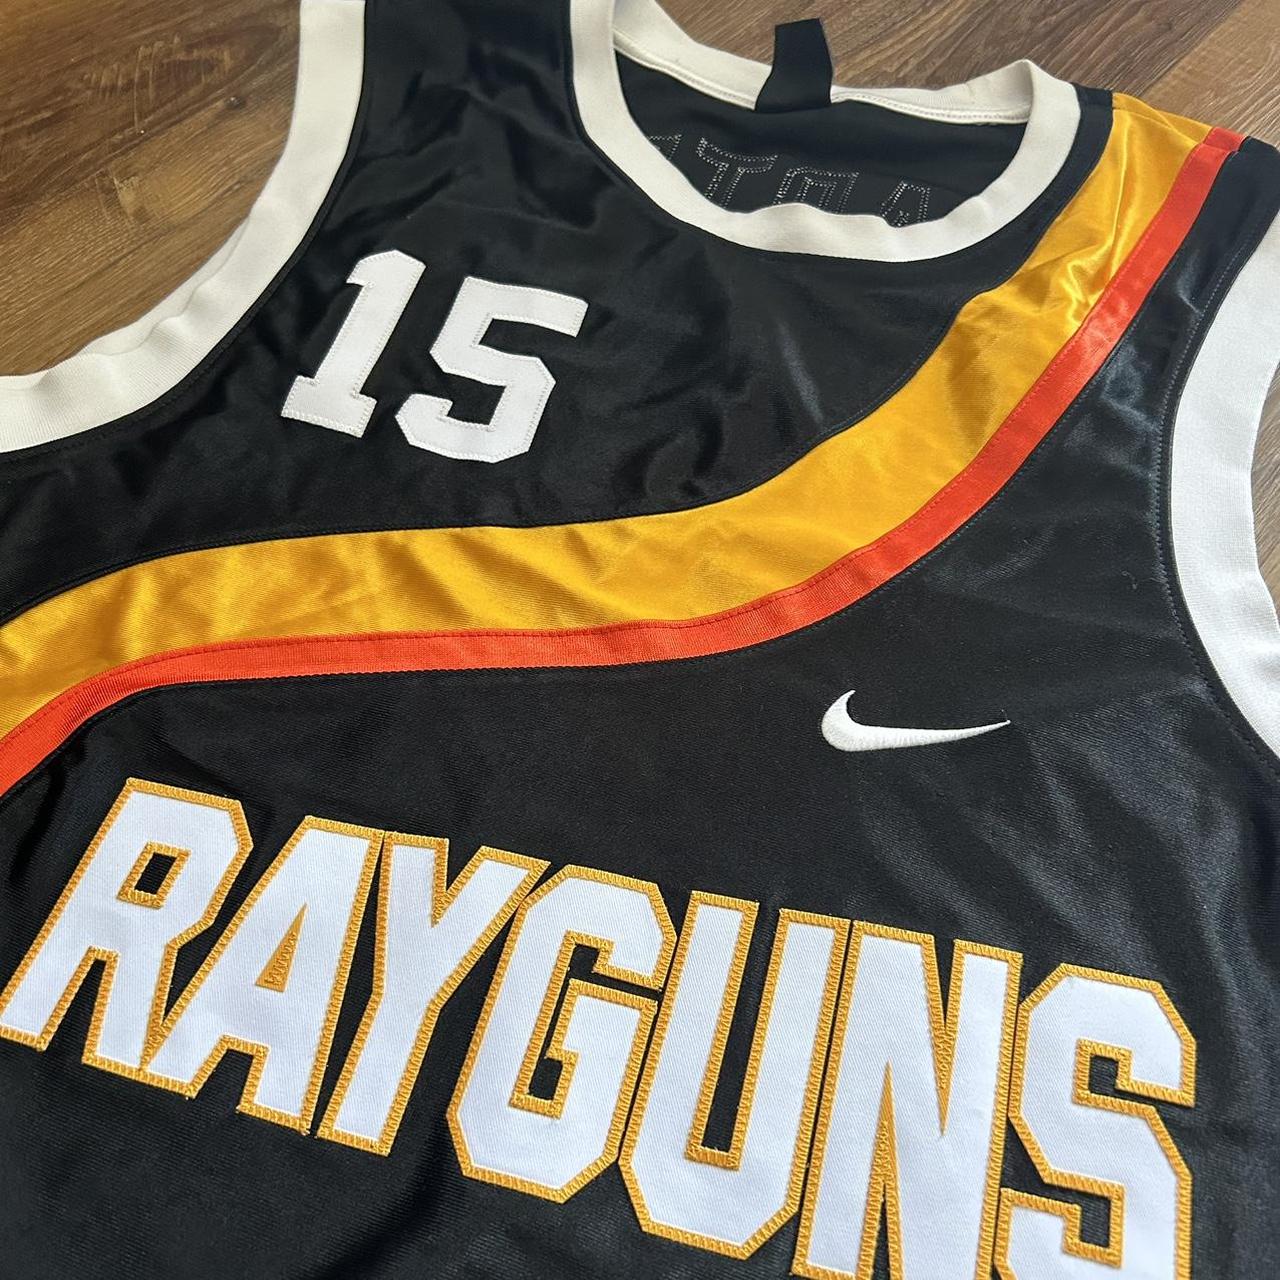 roswell rayguns jersey